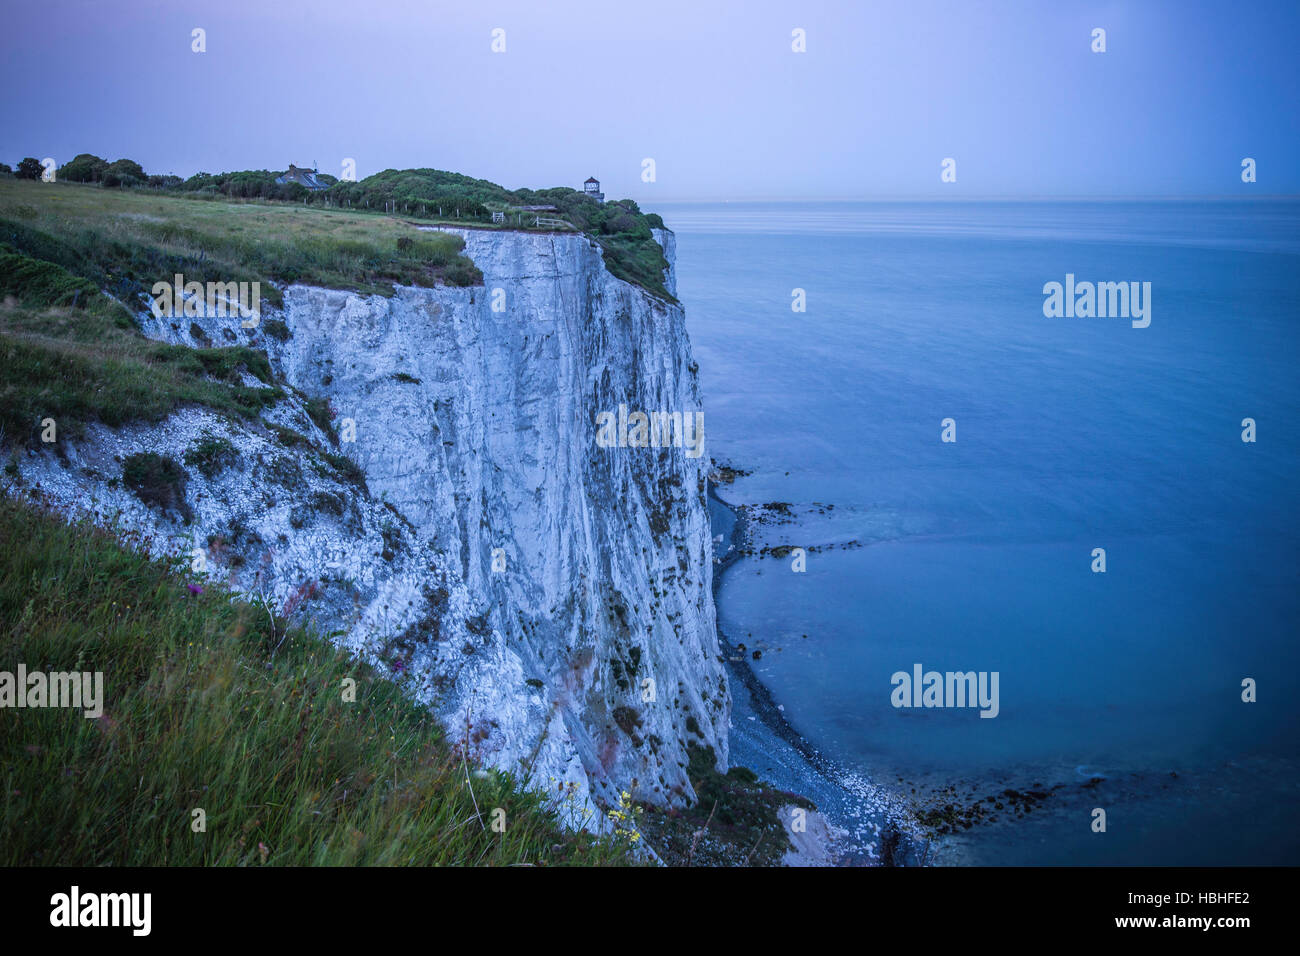 An evening scenery of the grand White Cliff located in Dover, United Kingdom. Stock Photo